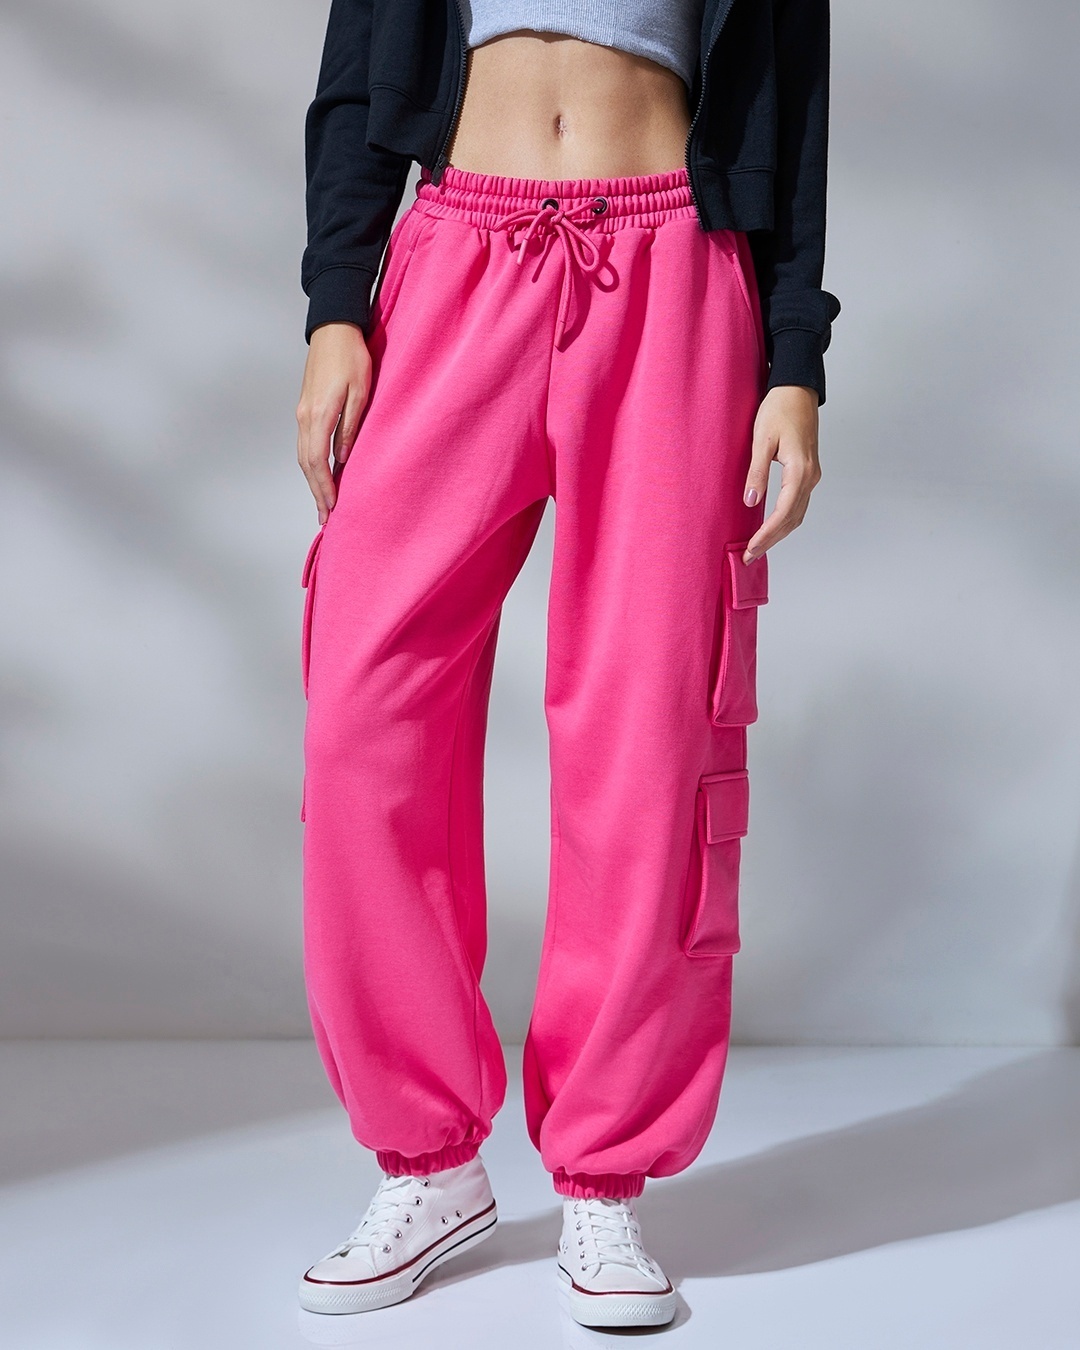 fashionable pink joggers